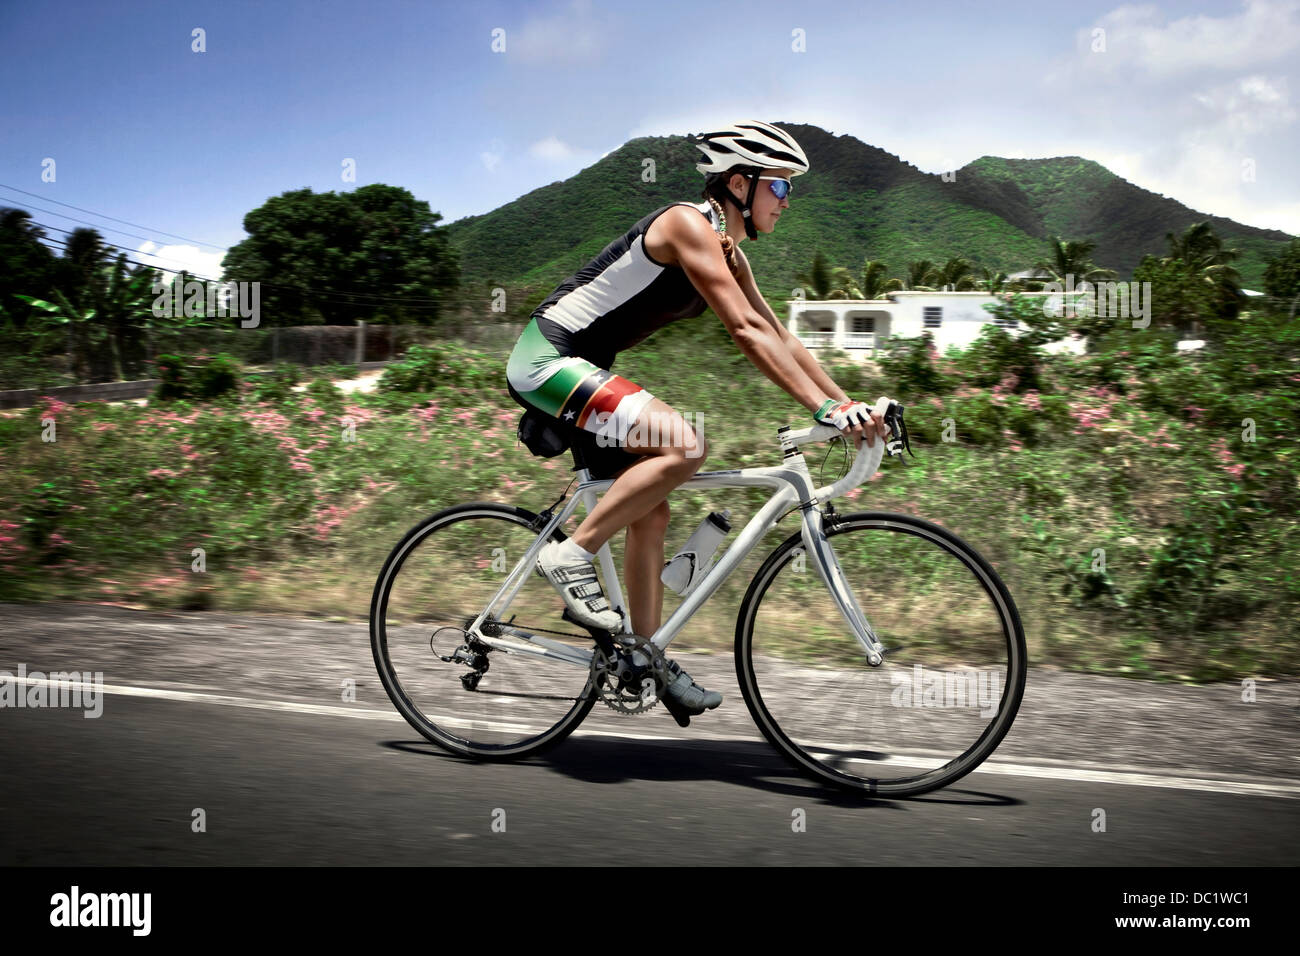 Mid adult triathlete cycling on road Stock Photo